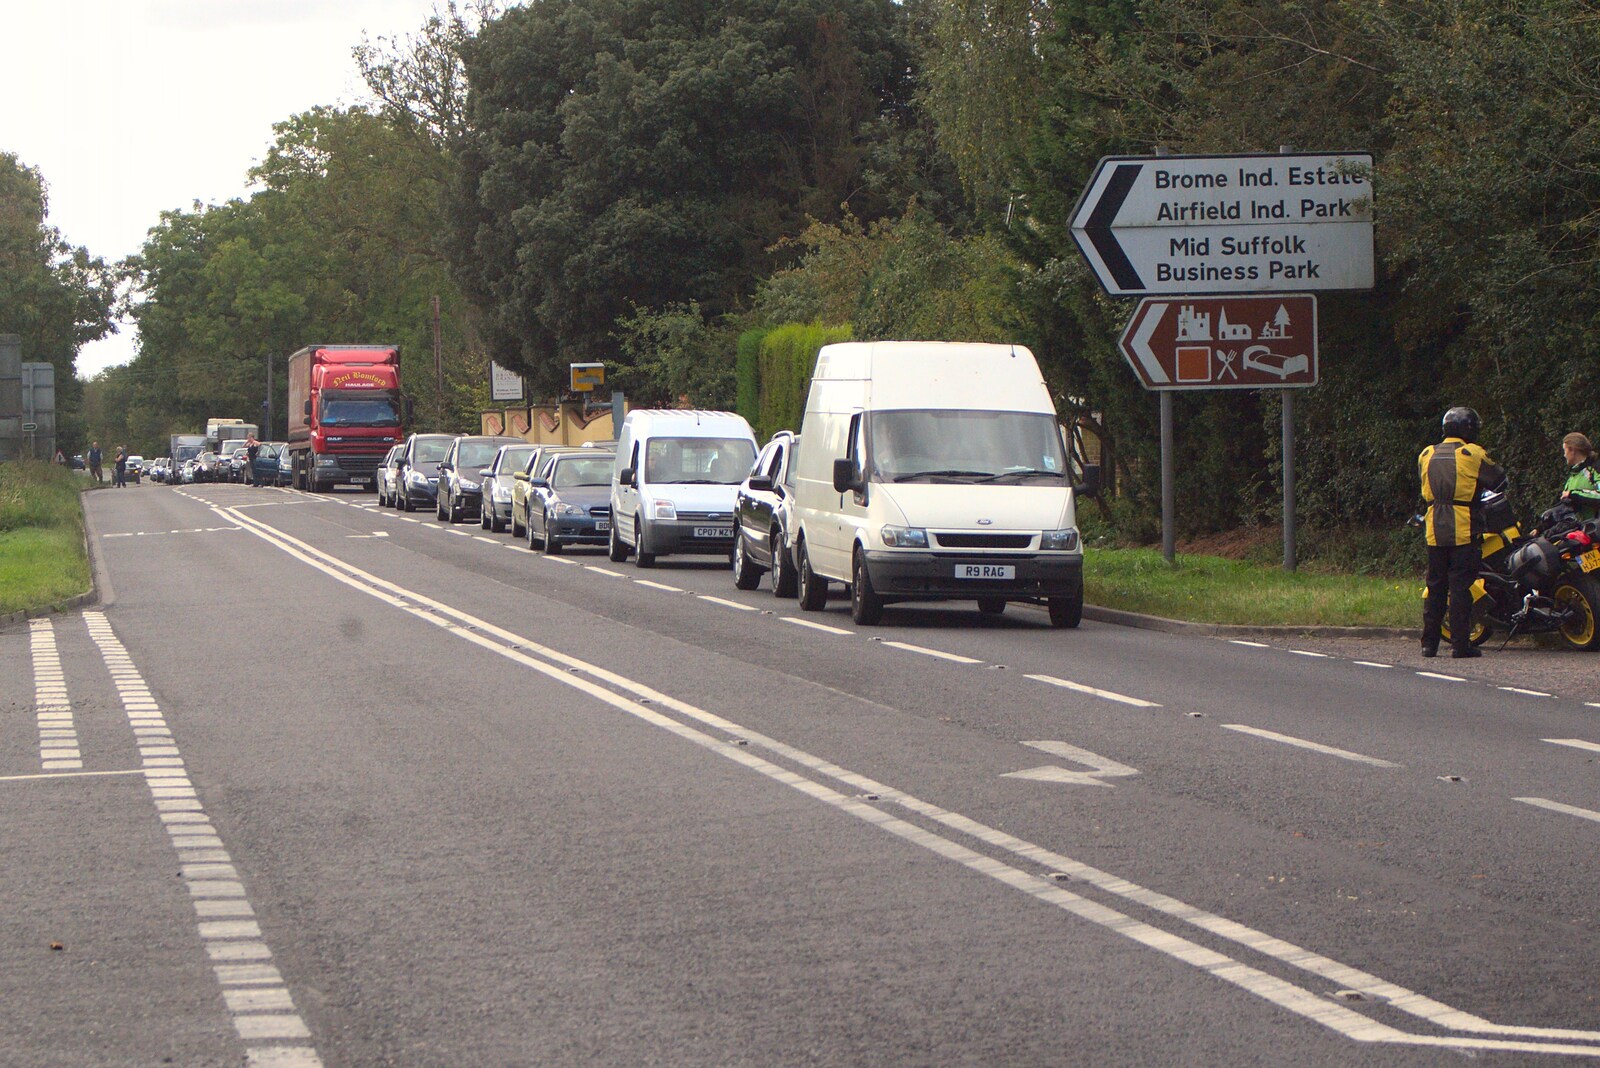 Traffic stacks up on the A140 from The Tour of Britain, Brome, Suffolk - 17th September 2011